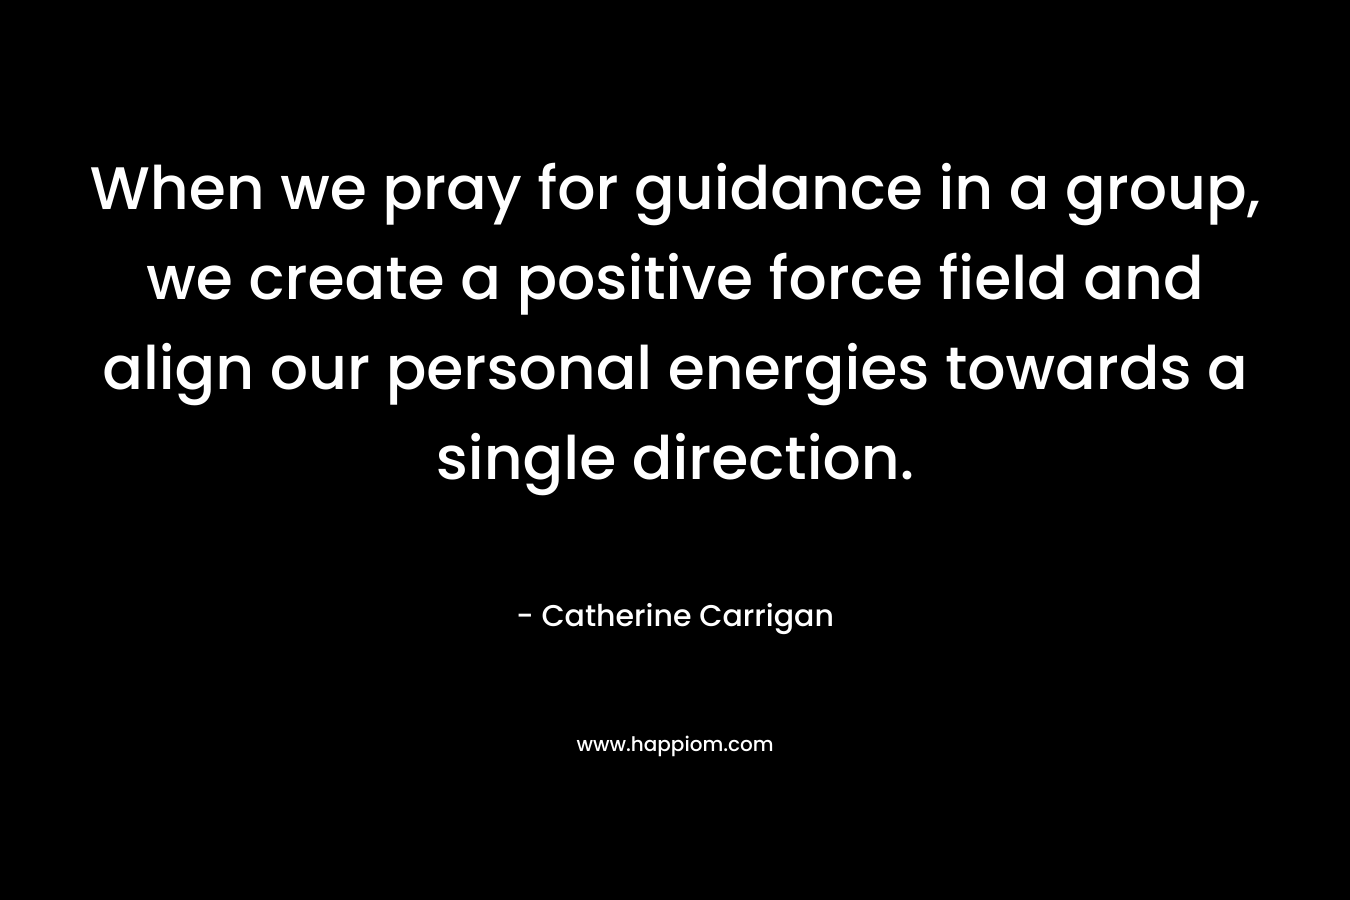 When we pray for guidance in a group, we create a positive force field and align our personal energies towards a single direction. – Catherine Carrigan